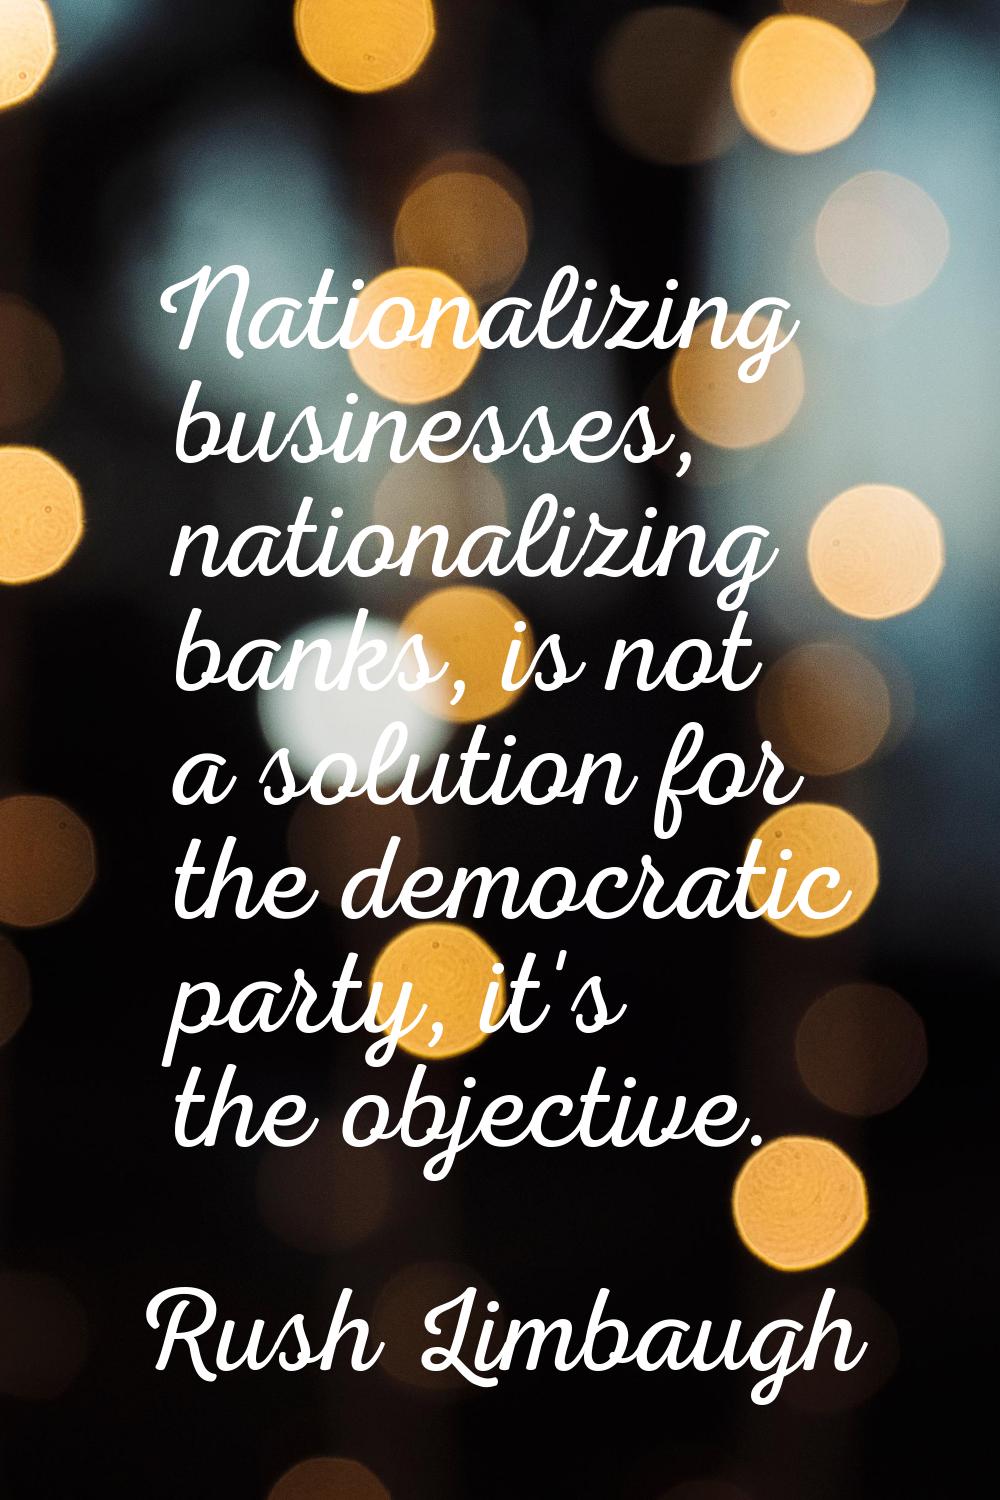 Nationalizing businesses, nationalizing banks, is not a solution for the democratic party, it's the